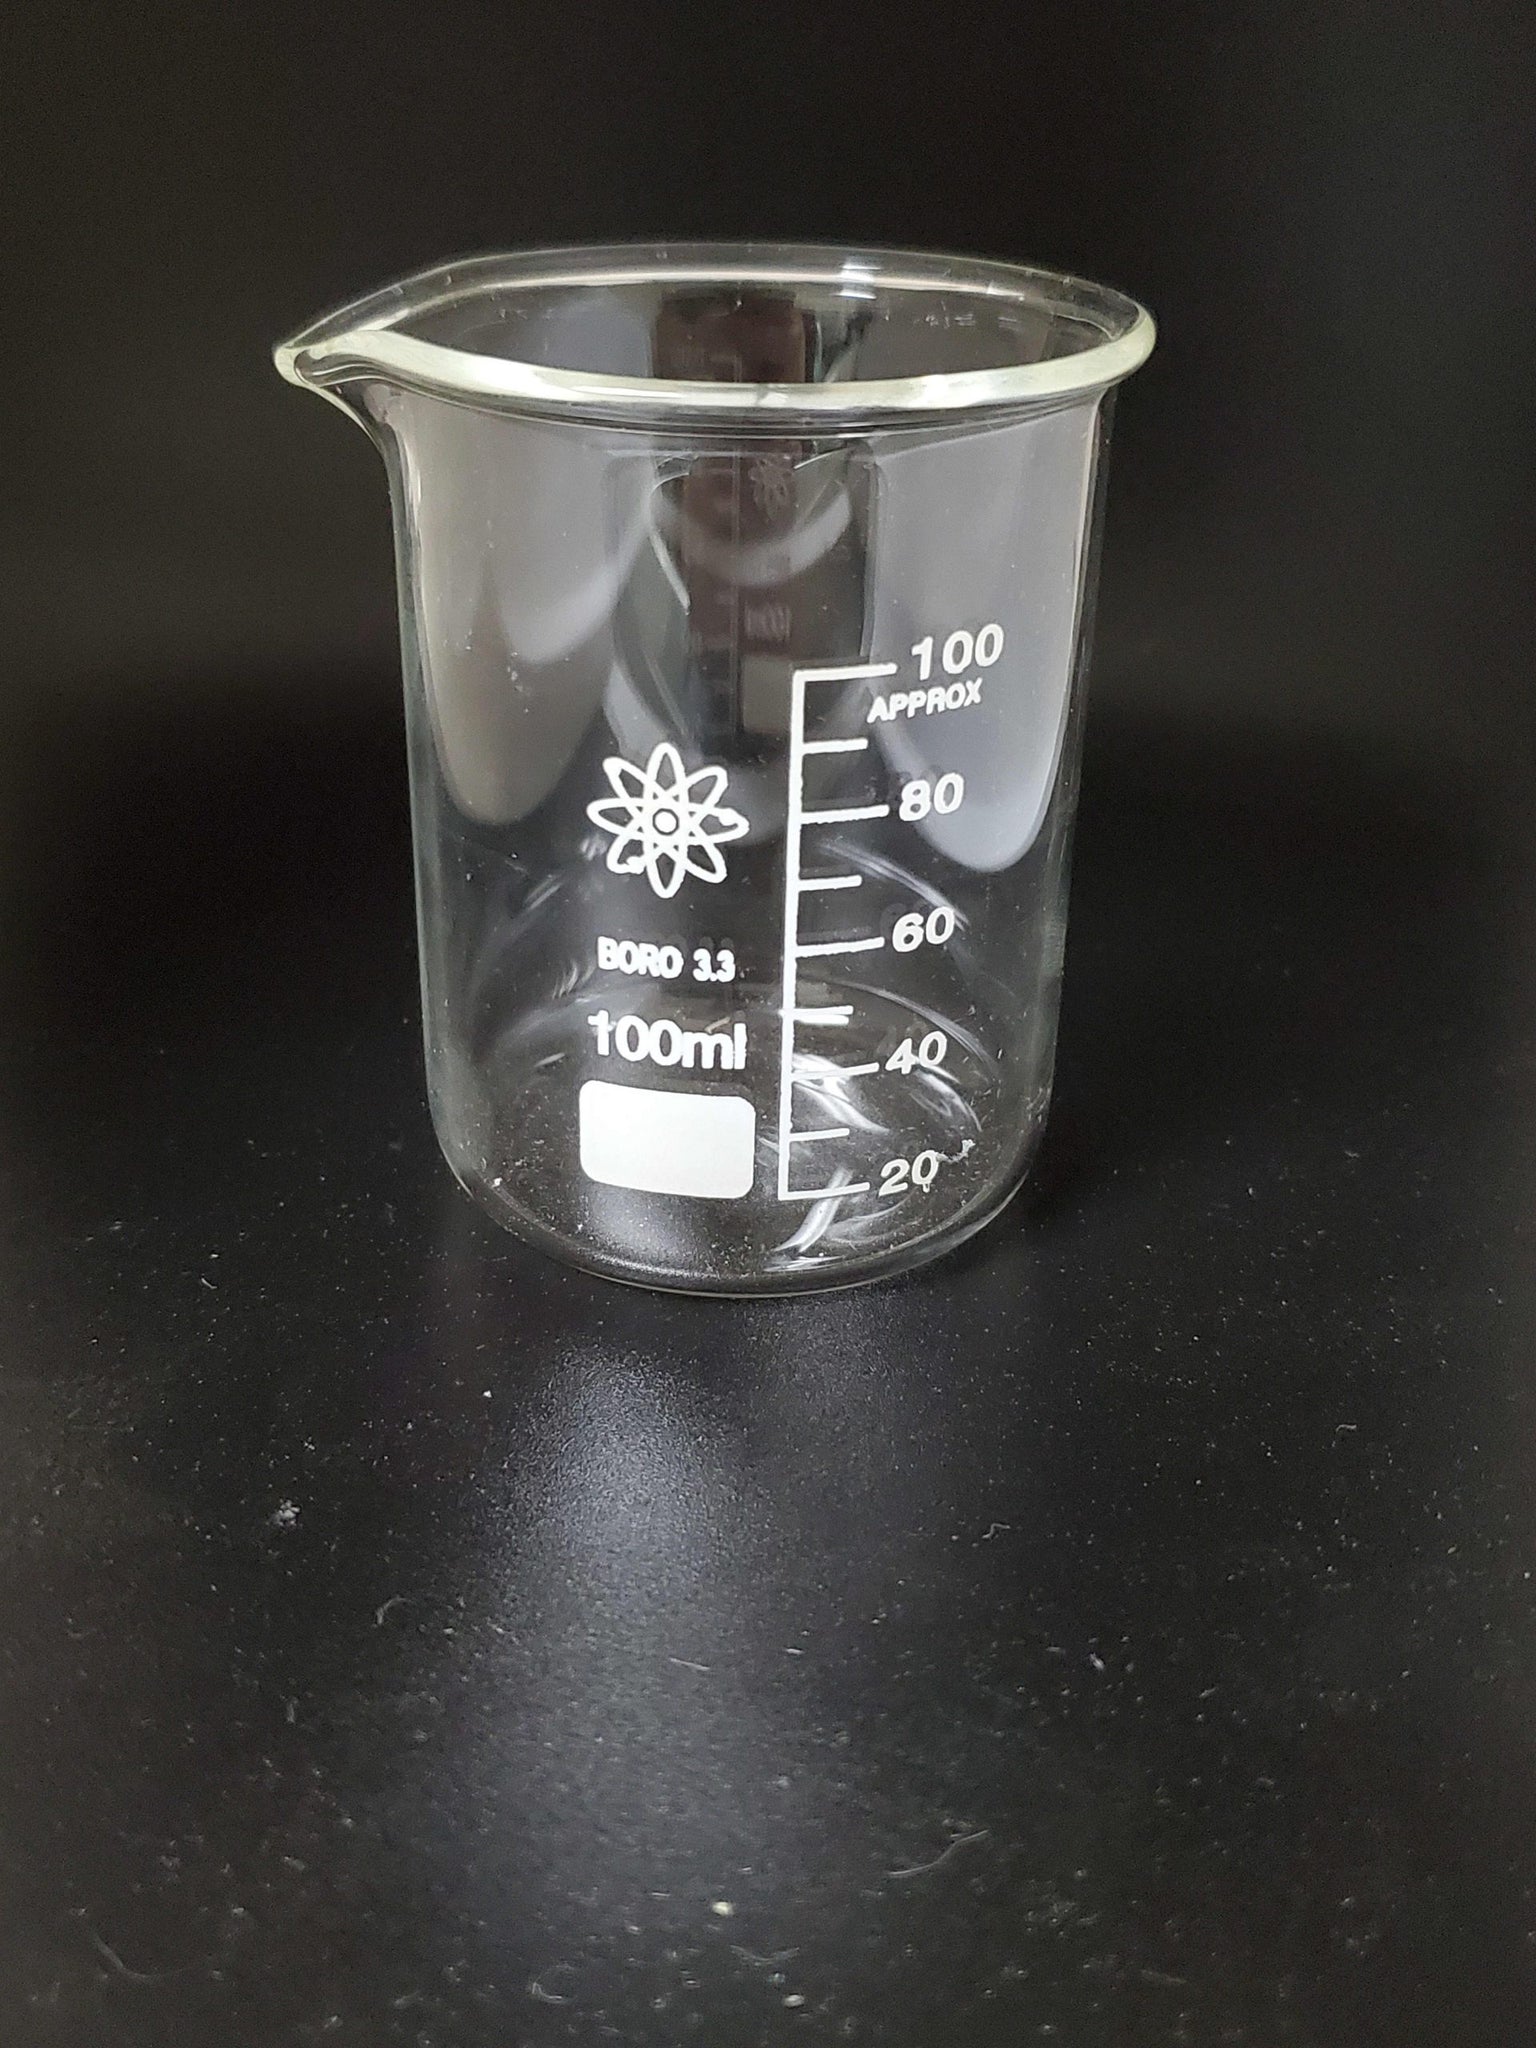 Industrial Strength, 100ml capacity Beaker for Laboratory Usage Sold by Viking Labs Supply